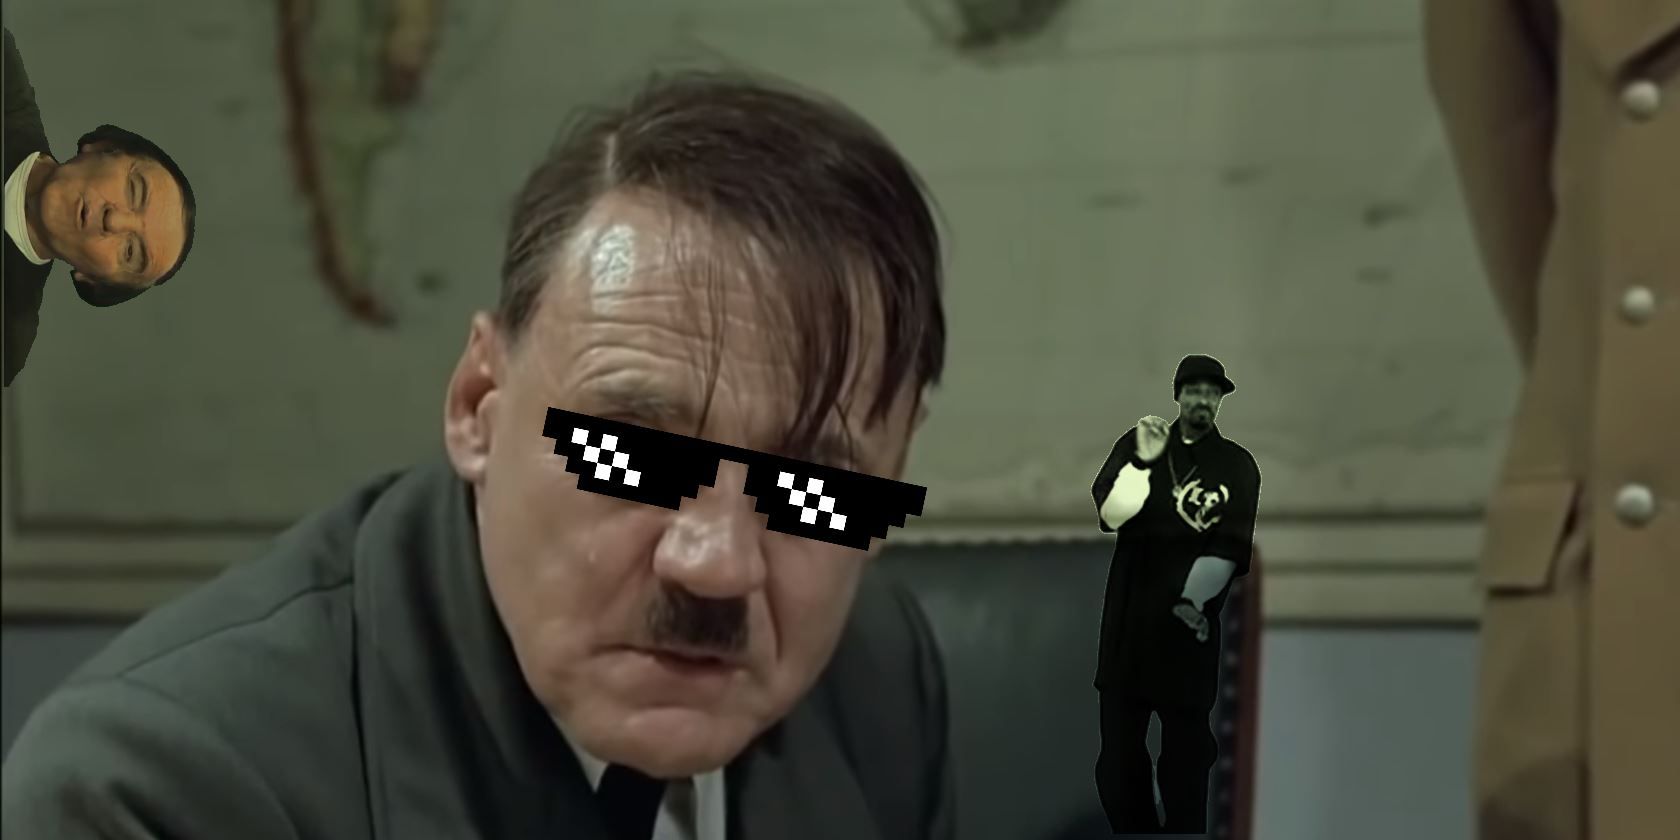 How to Make Your Own Hitler Video Meme With Subtitles ...